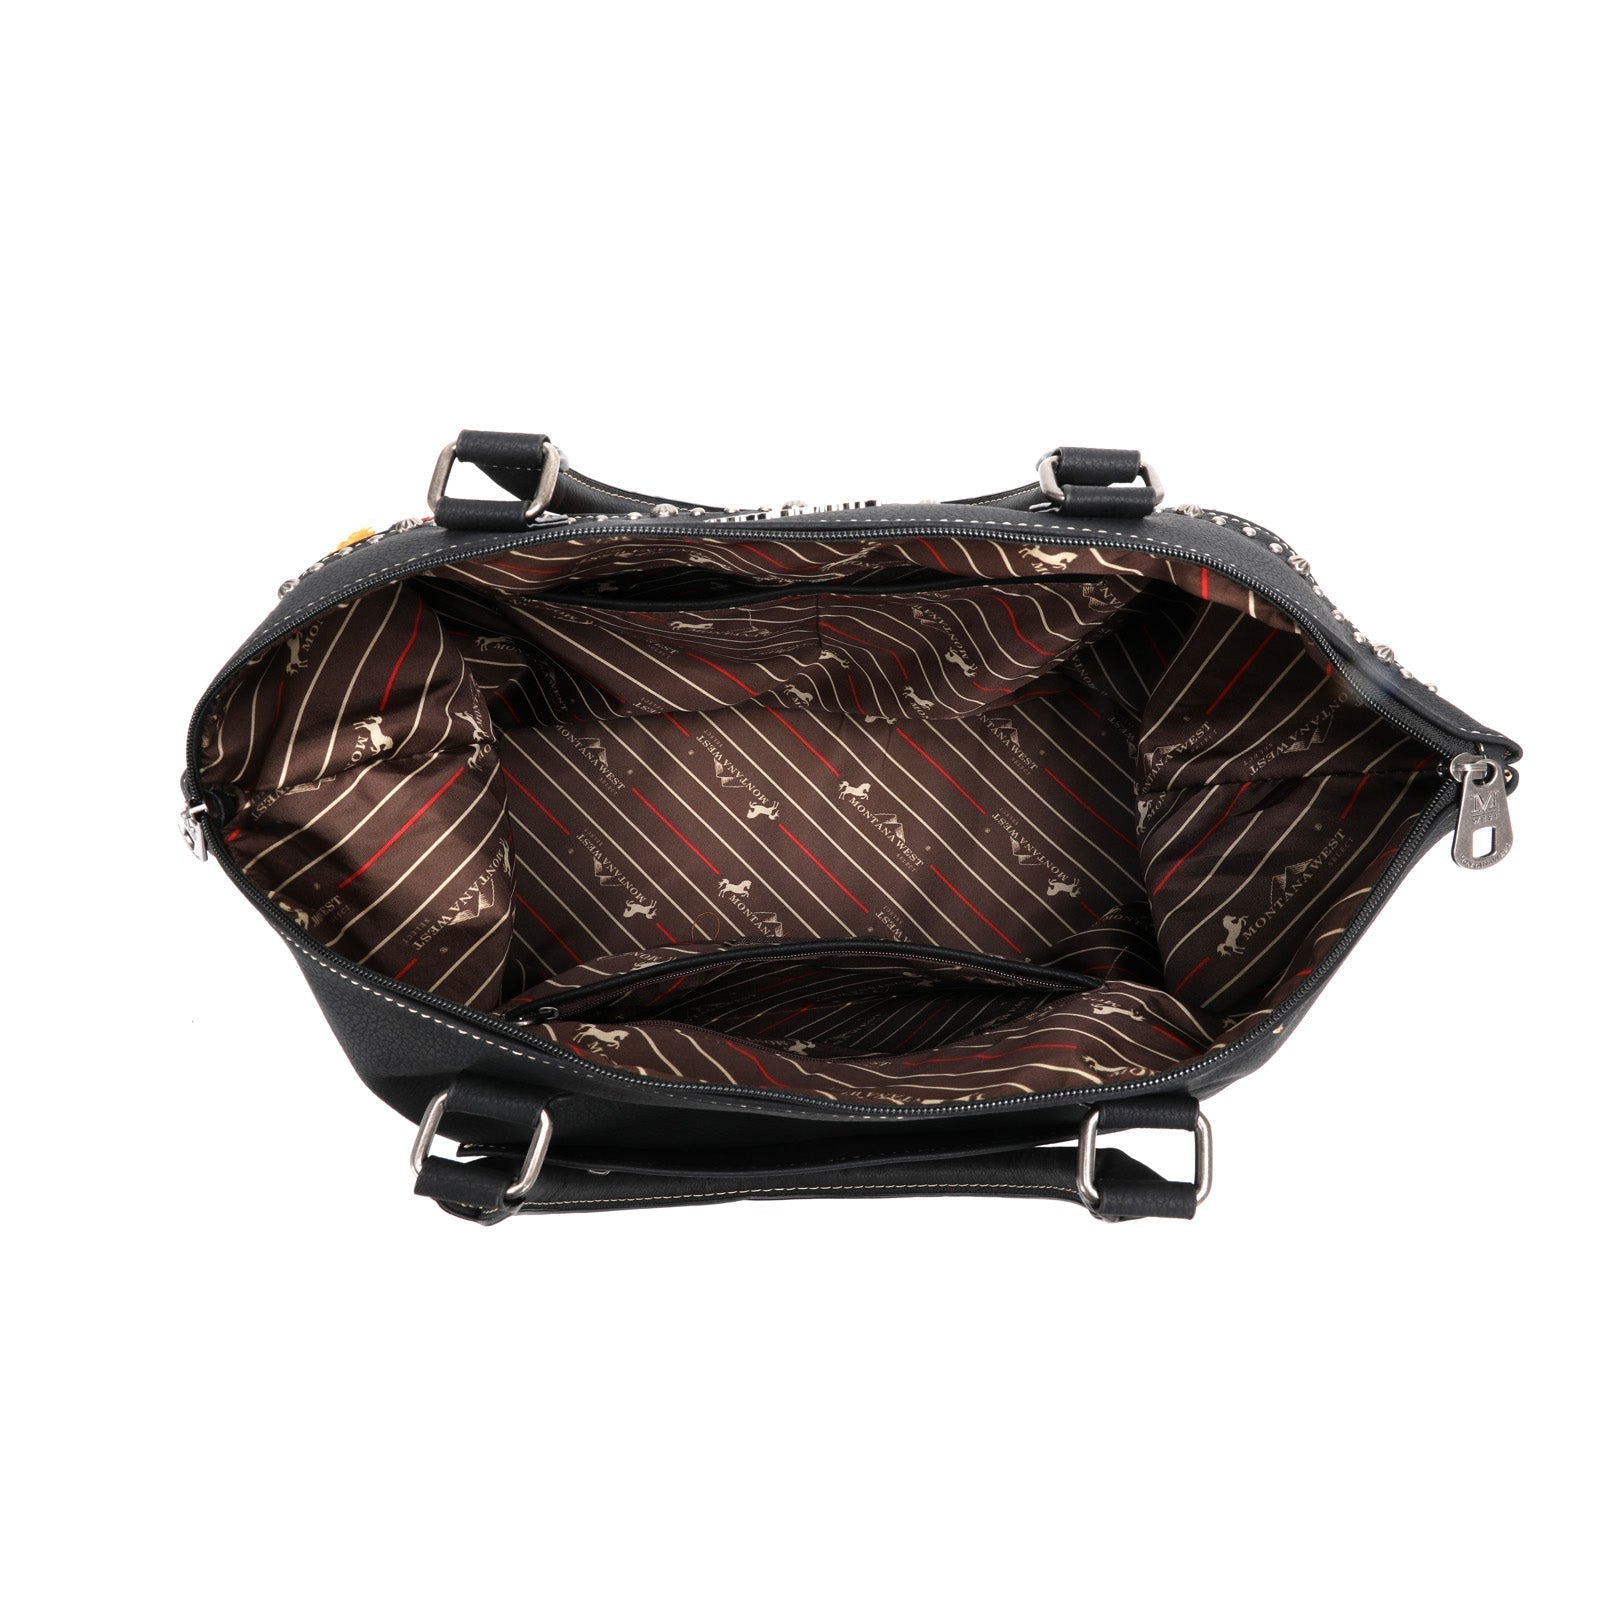 Montana West Aztec Tapestry Collection Weekender Bag Collection - Montana West World